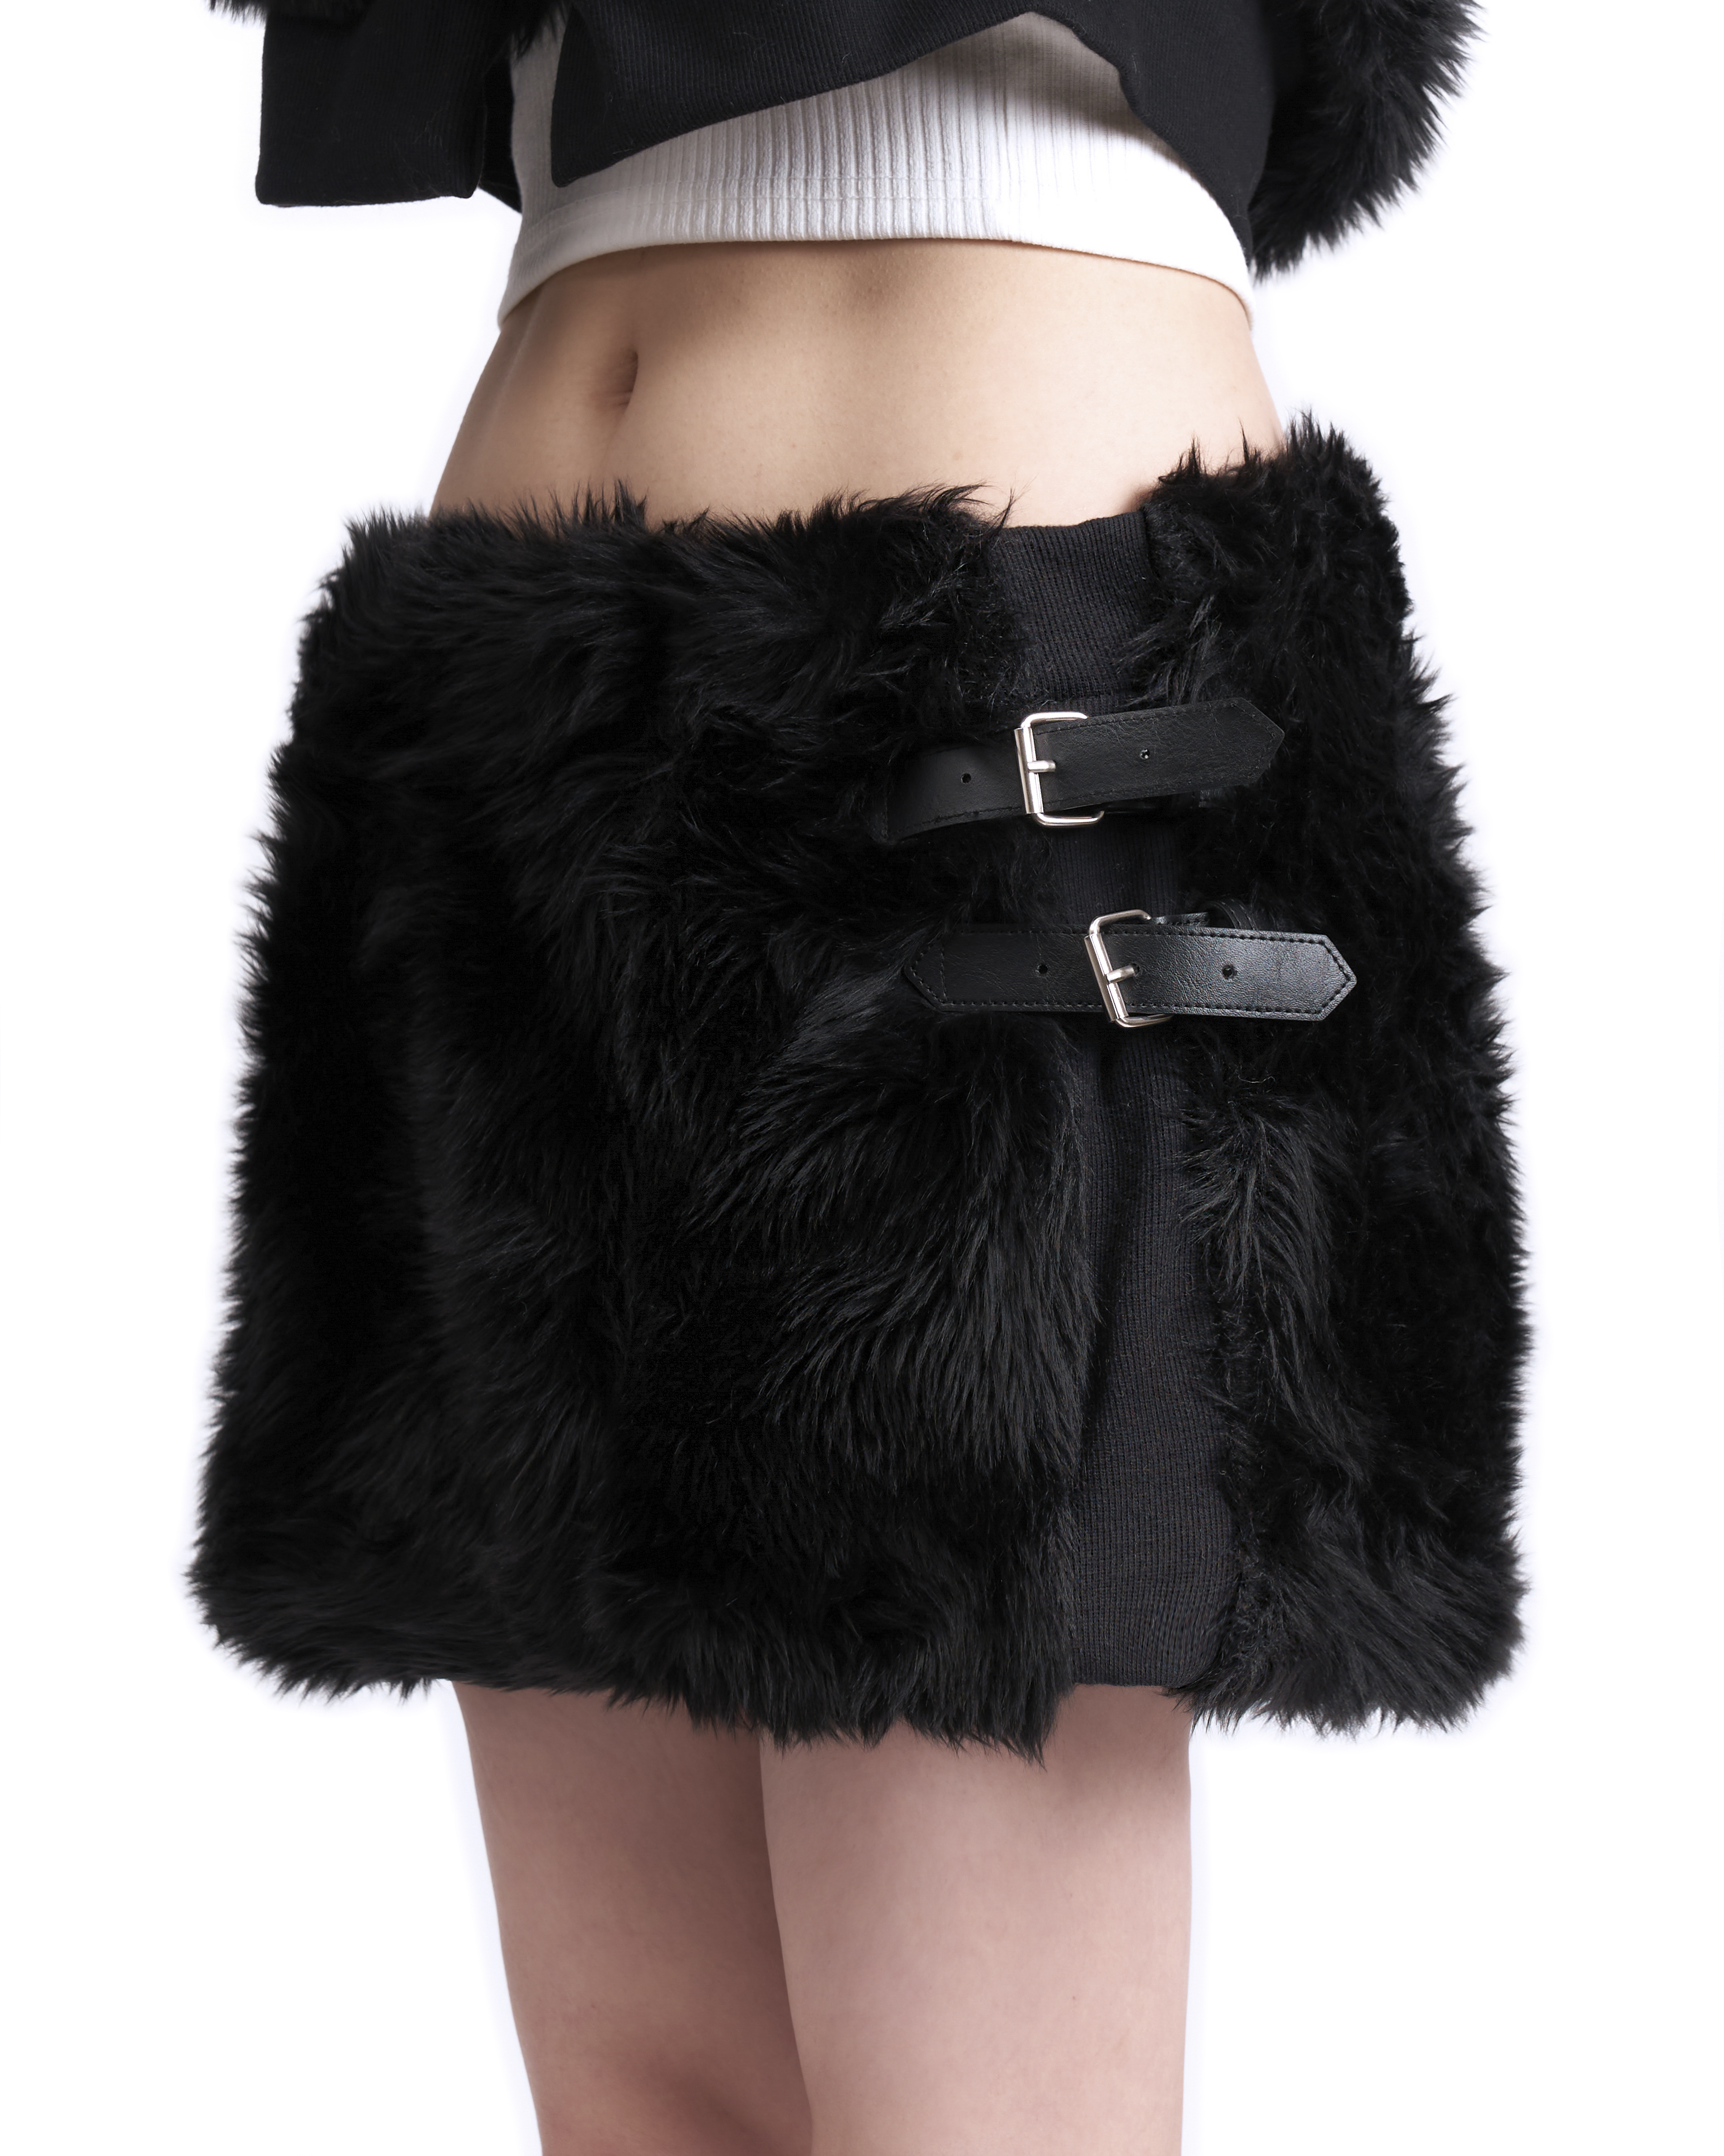 [LIMITED EDITION] FUR STRAP LOW-RISE SKIRT